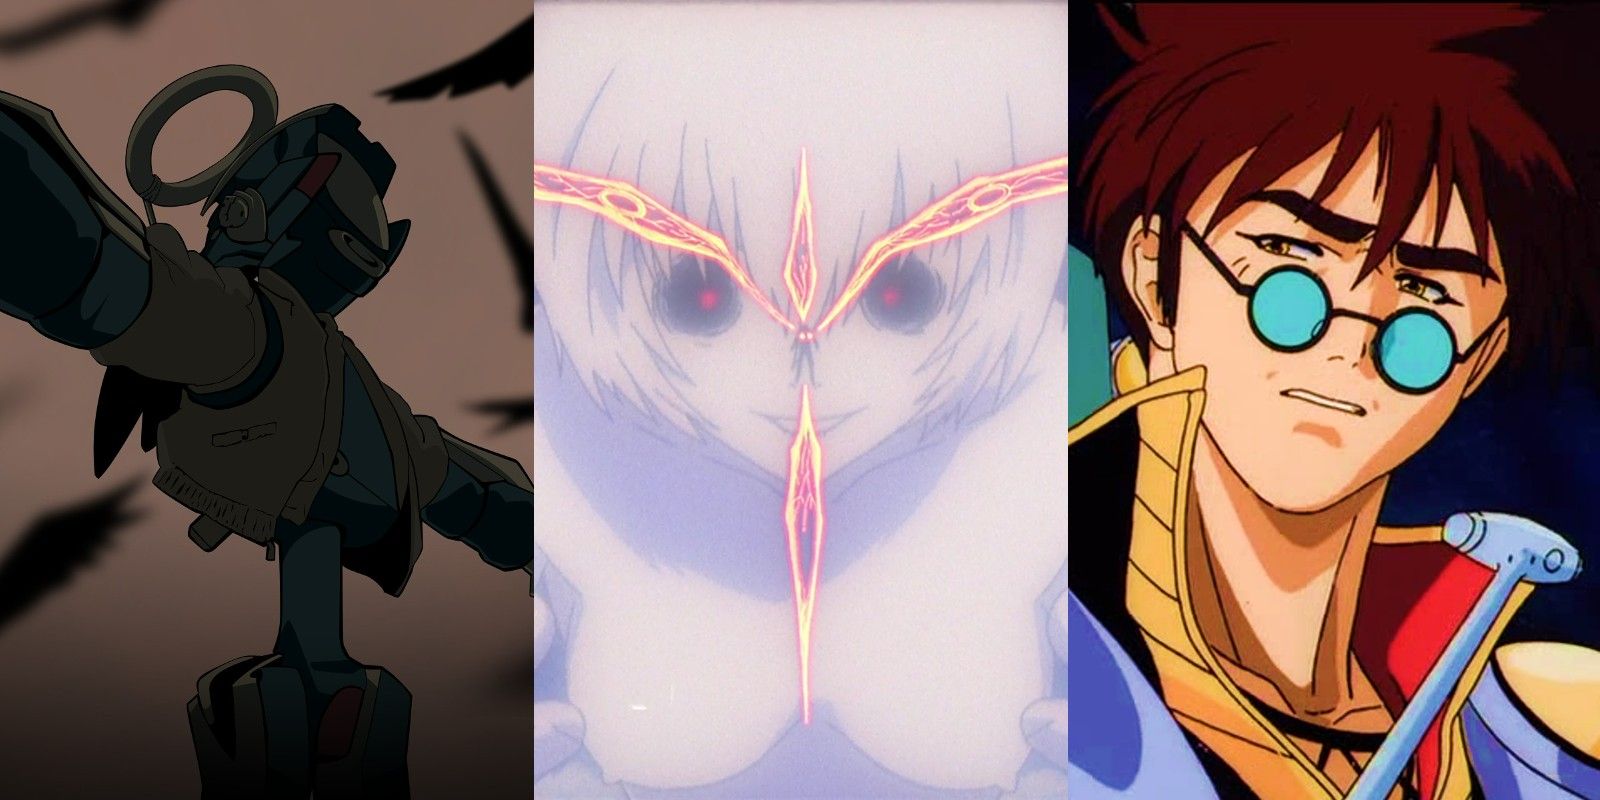 FLCL, End of Evangelion, and Macross 7